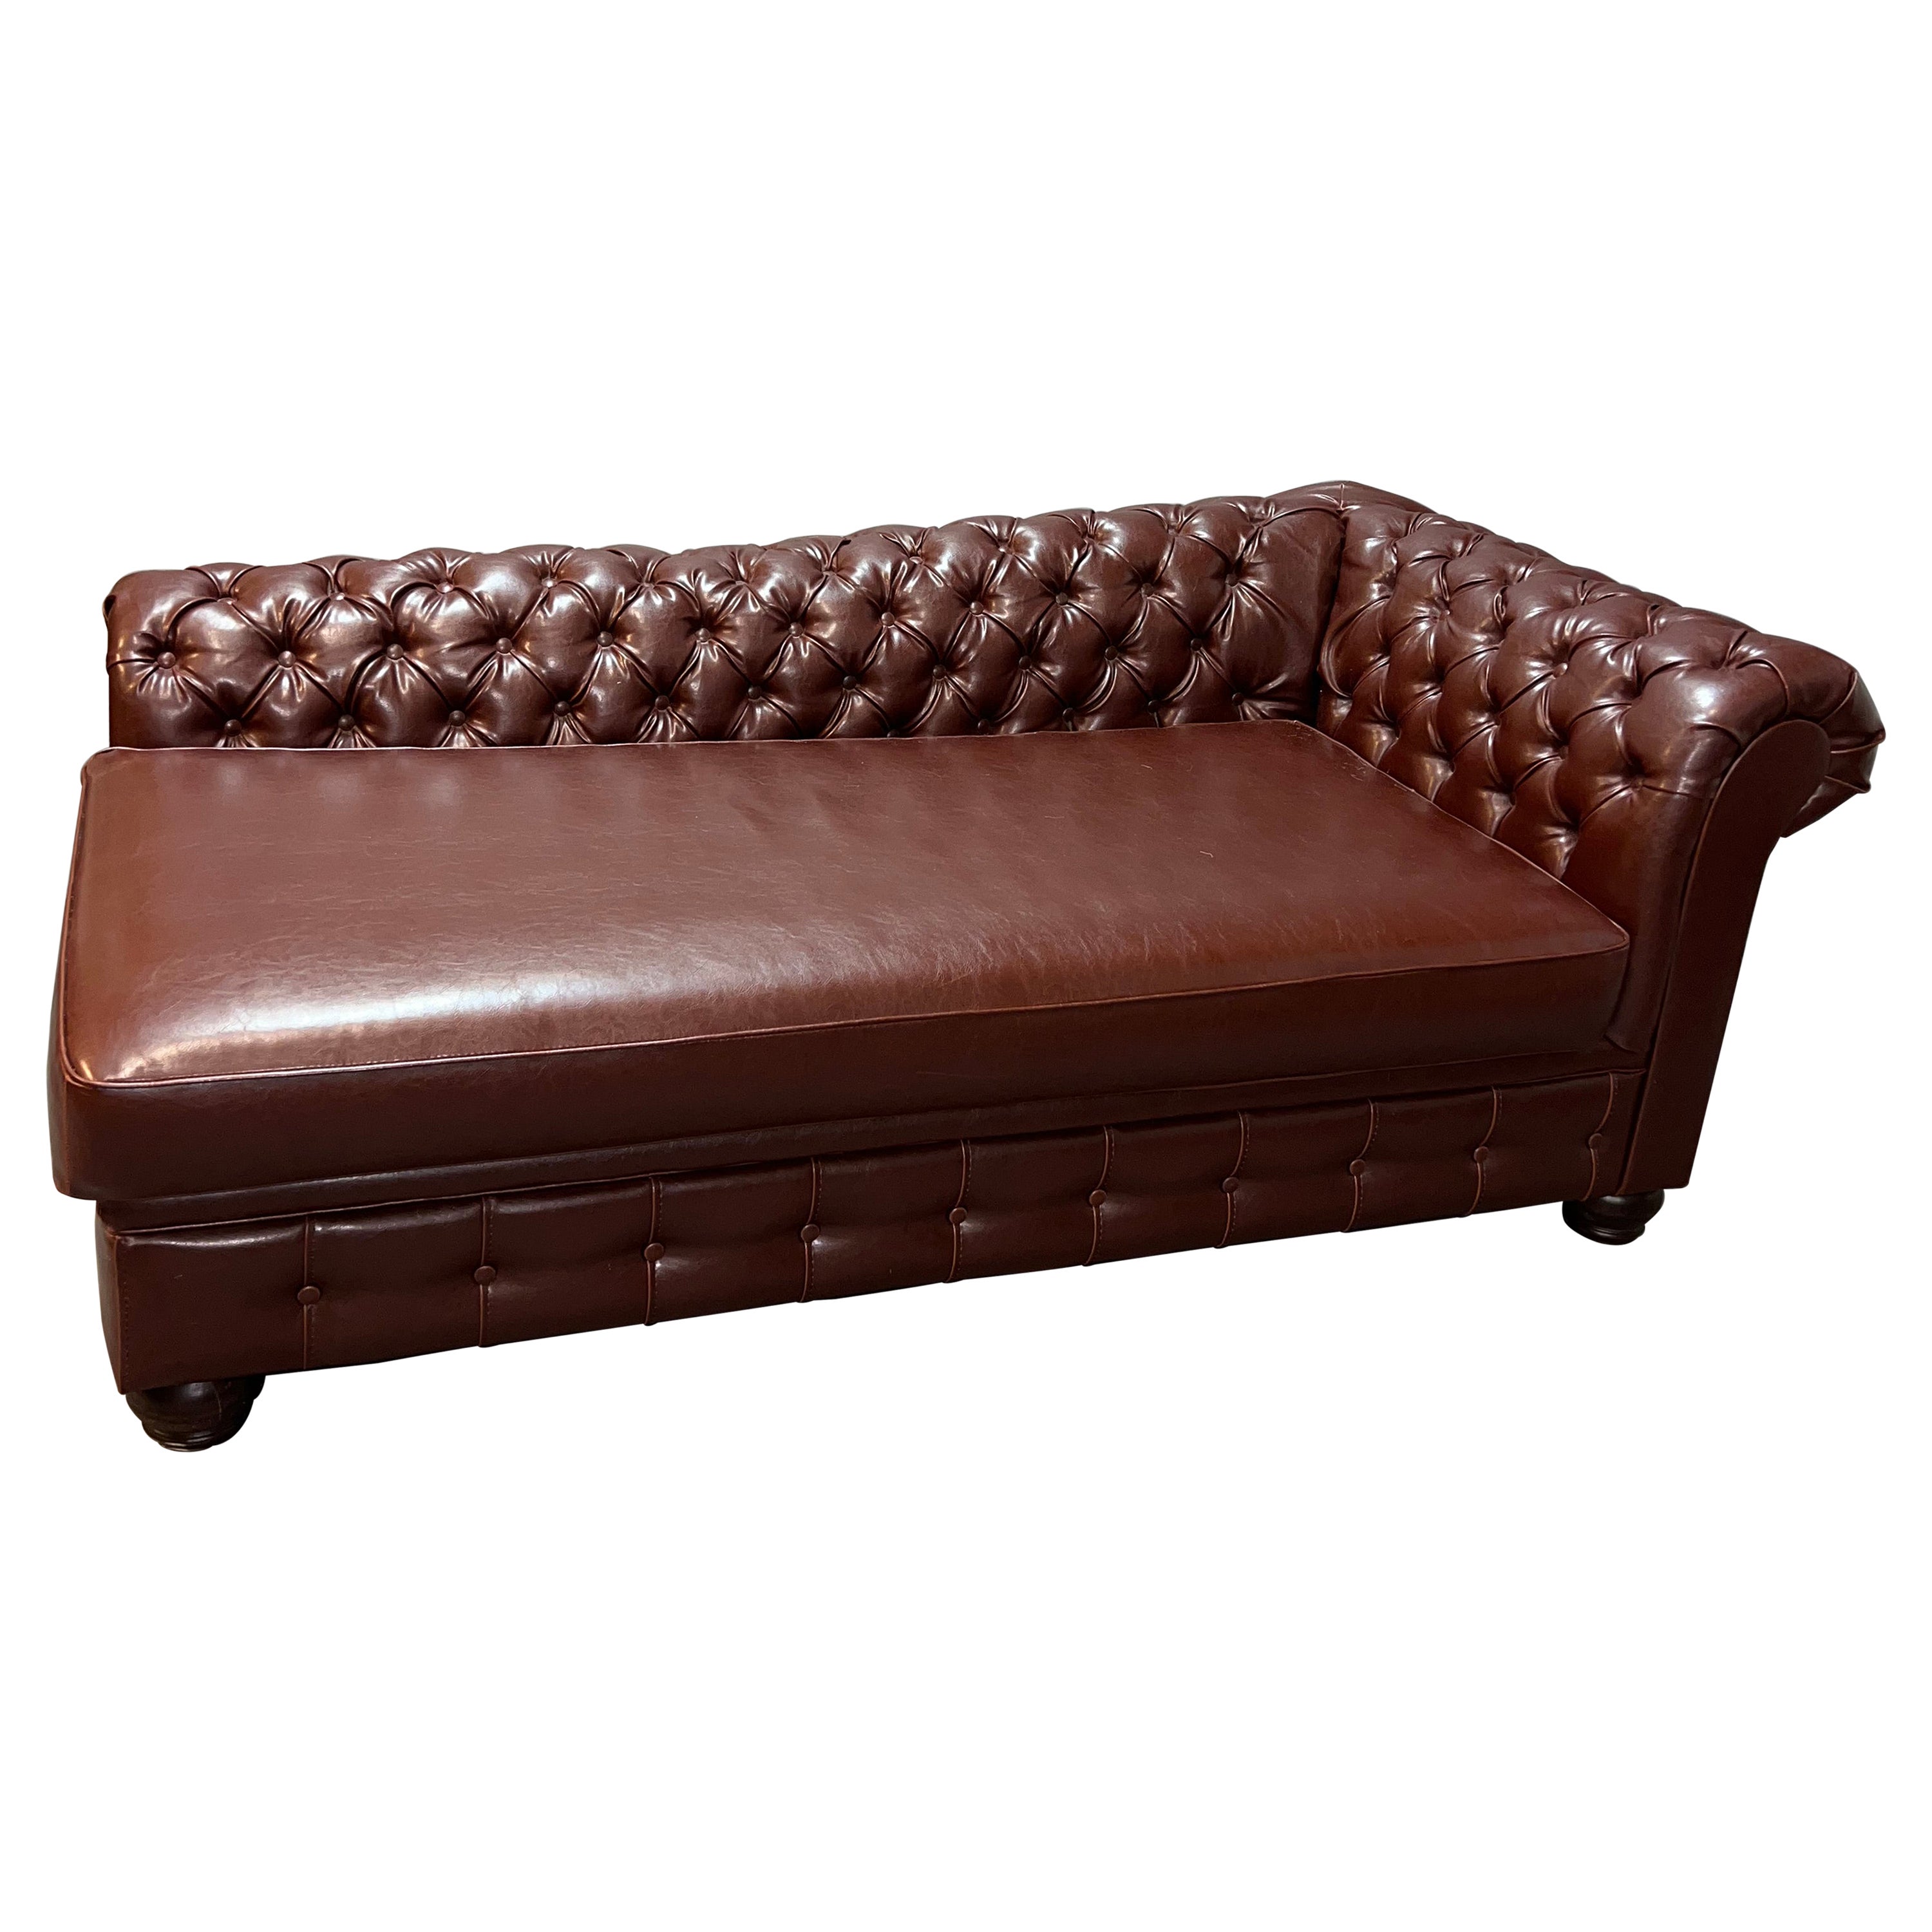 Lovely Vintage Chesterfield Brown Leder Look Chaise Lounge Daybed Sofa im Angebot